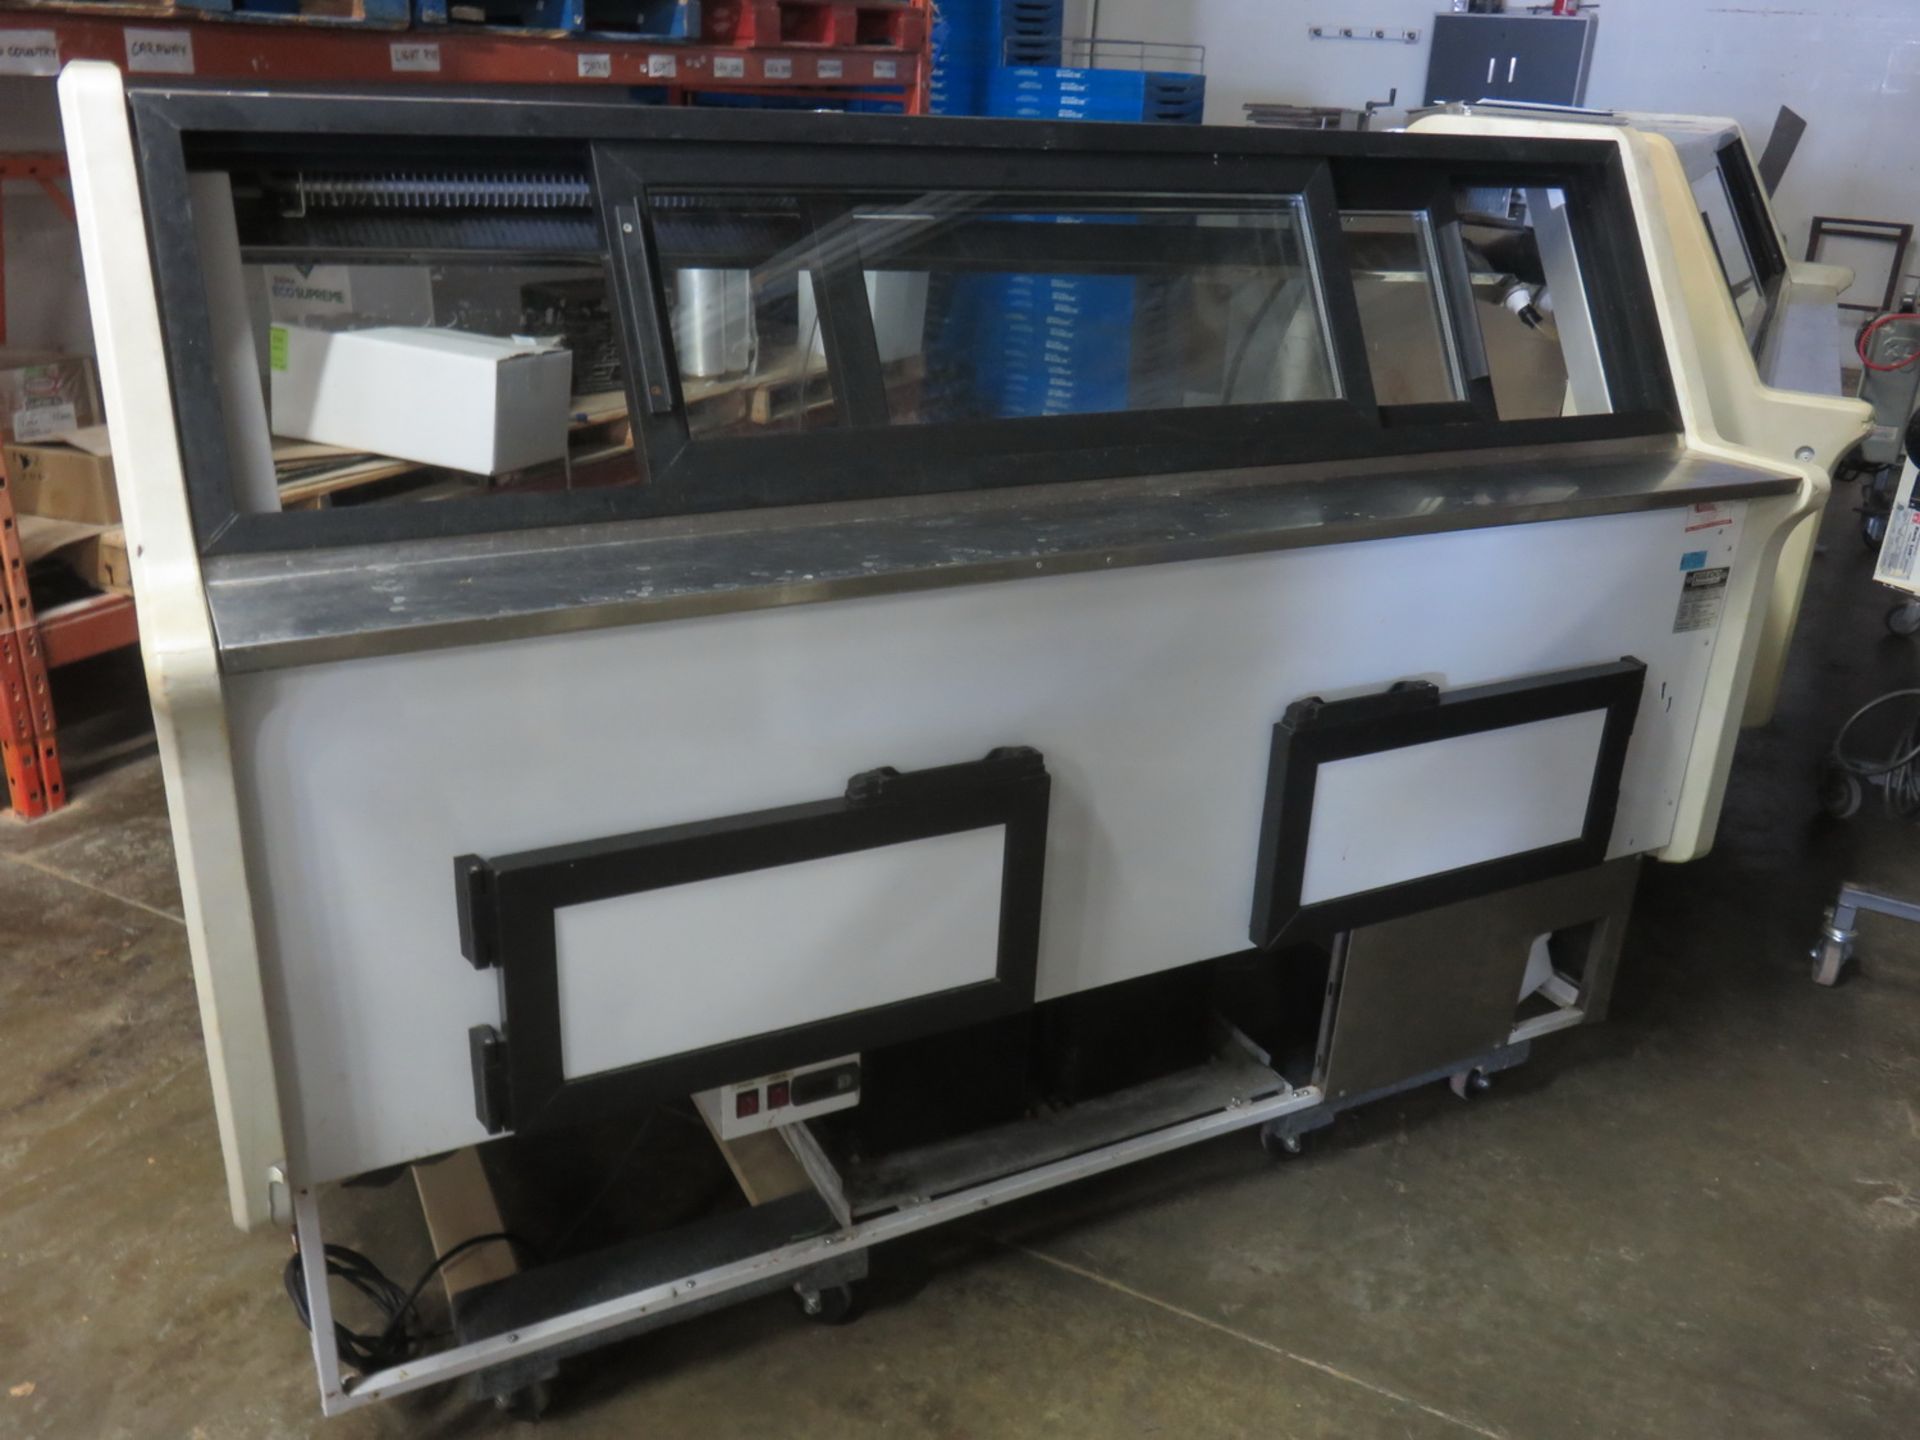 IGLOO MODEL RSC6 6'L REFRIGERATED DELI COUNTER DISPLAY, S/N R6-050315-1/6427 - Image 2 of 3